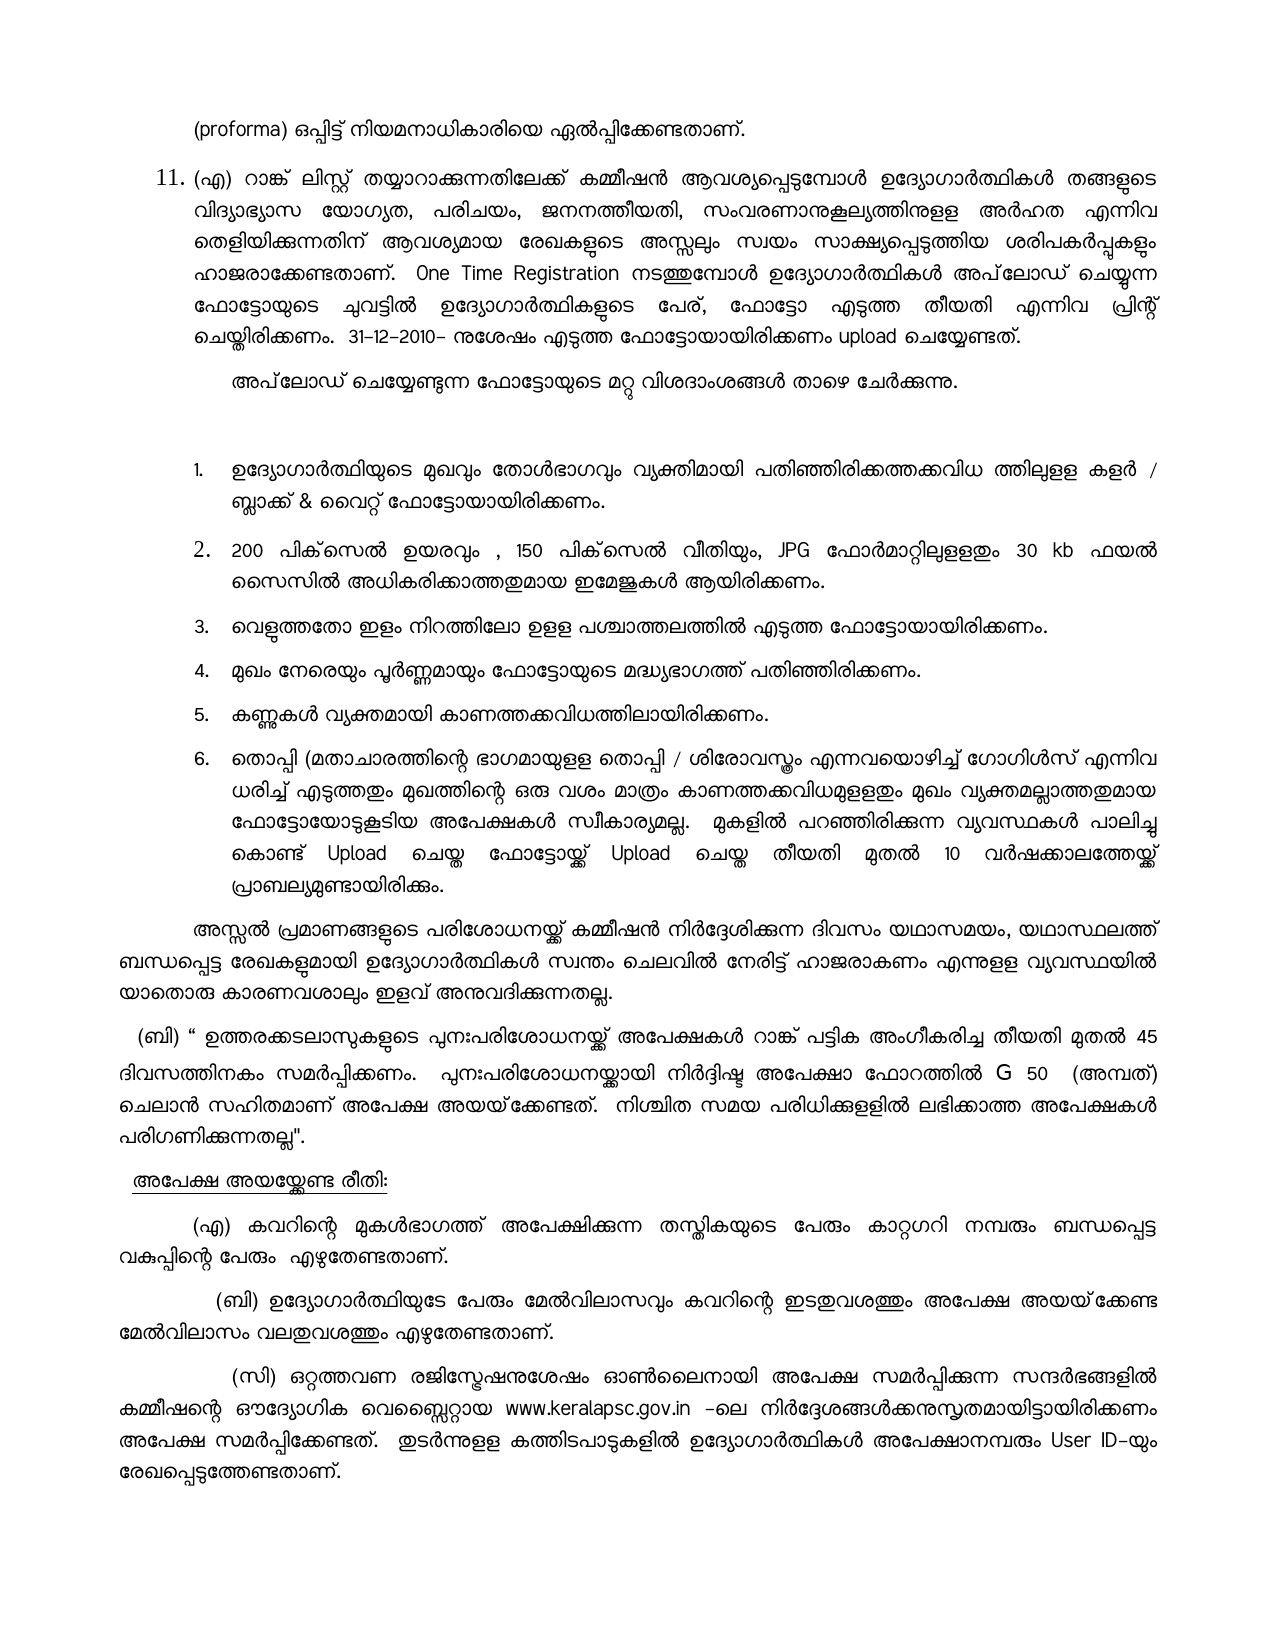 General Conditions and Certificate Formats in Malayalam - Notification Image 12